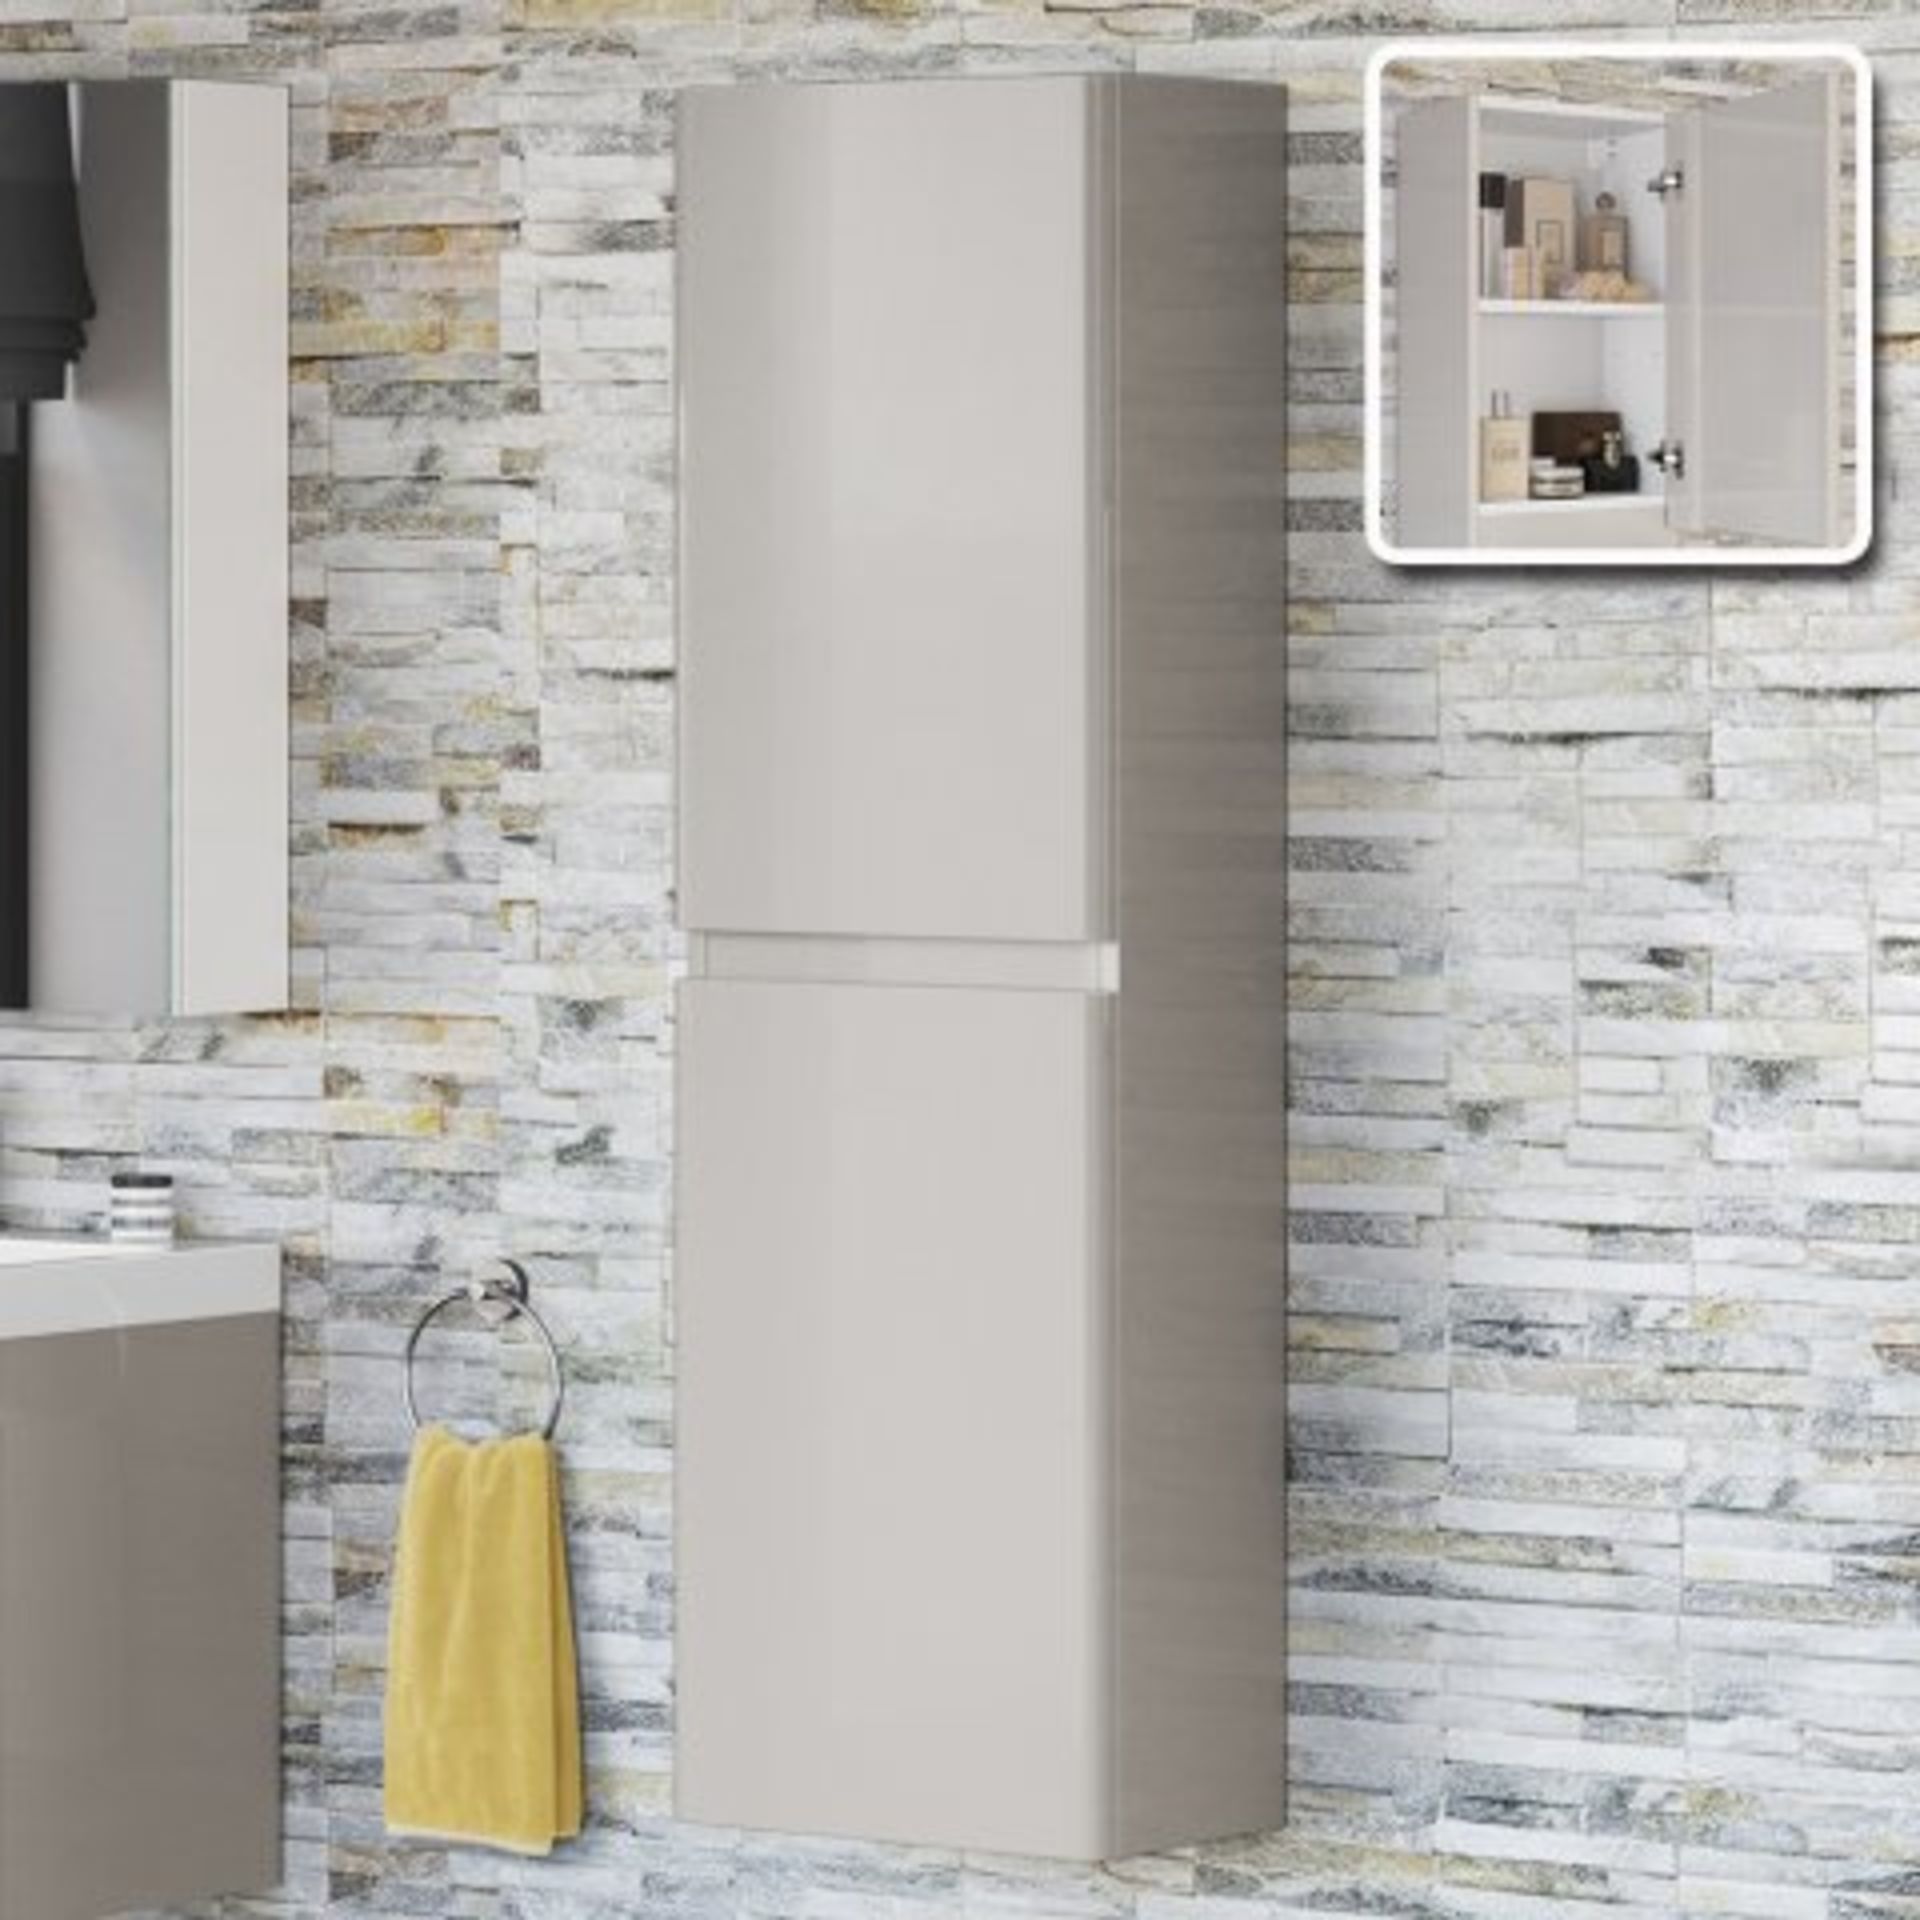 AA246- 1400mm Denver II Gloss Cashmere Tall Storage Cabinet - Wall Hung. RRP £299.99. With its